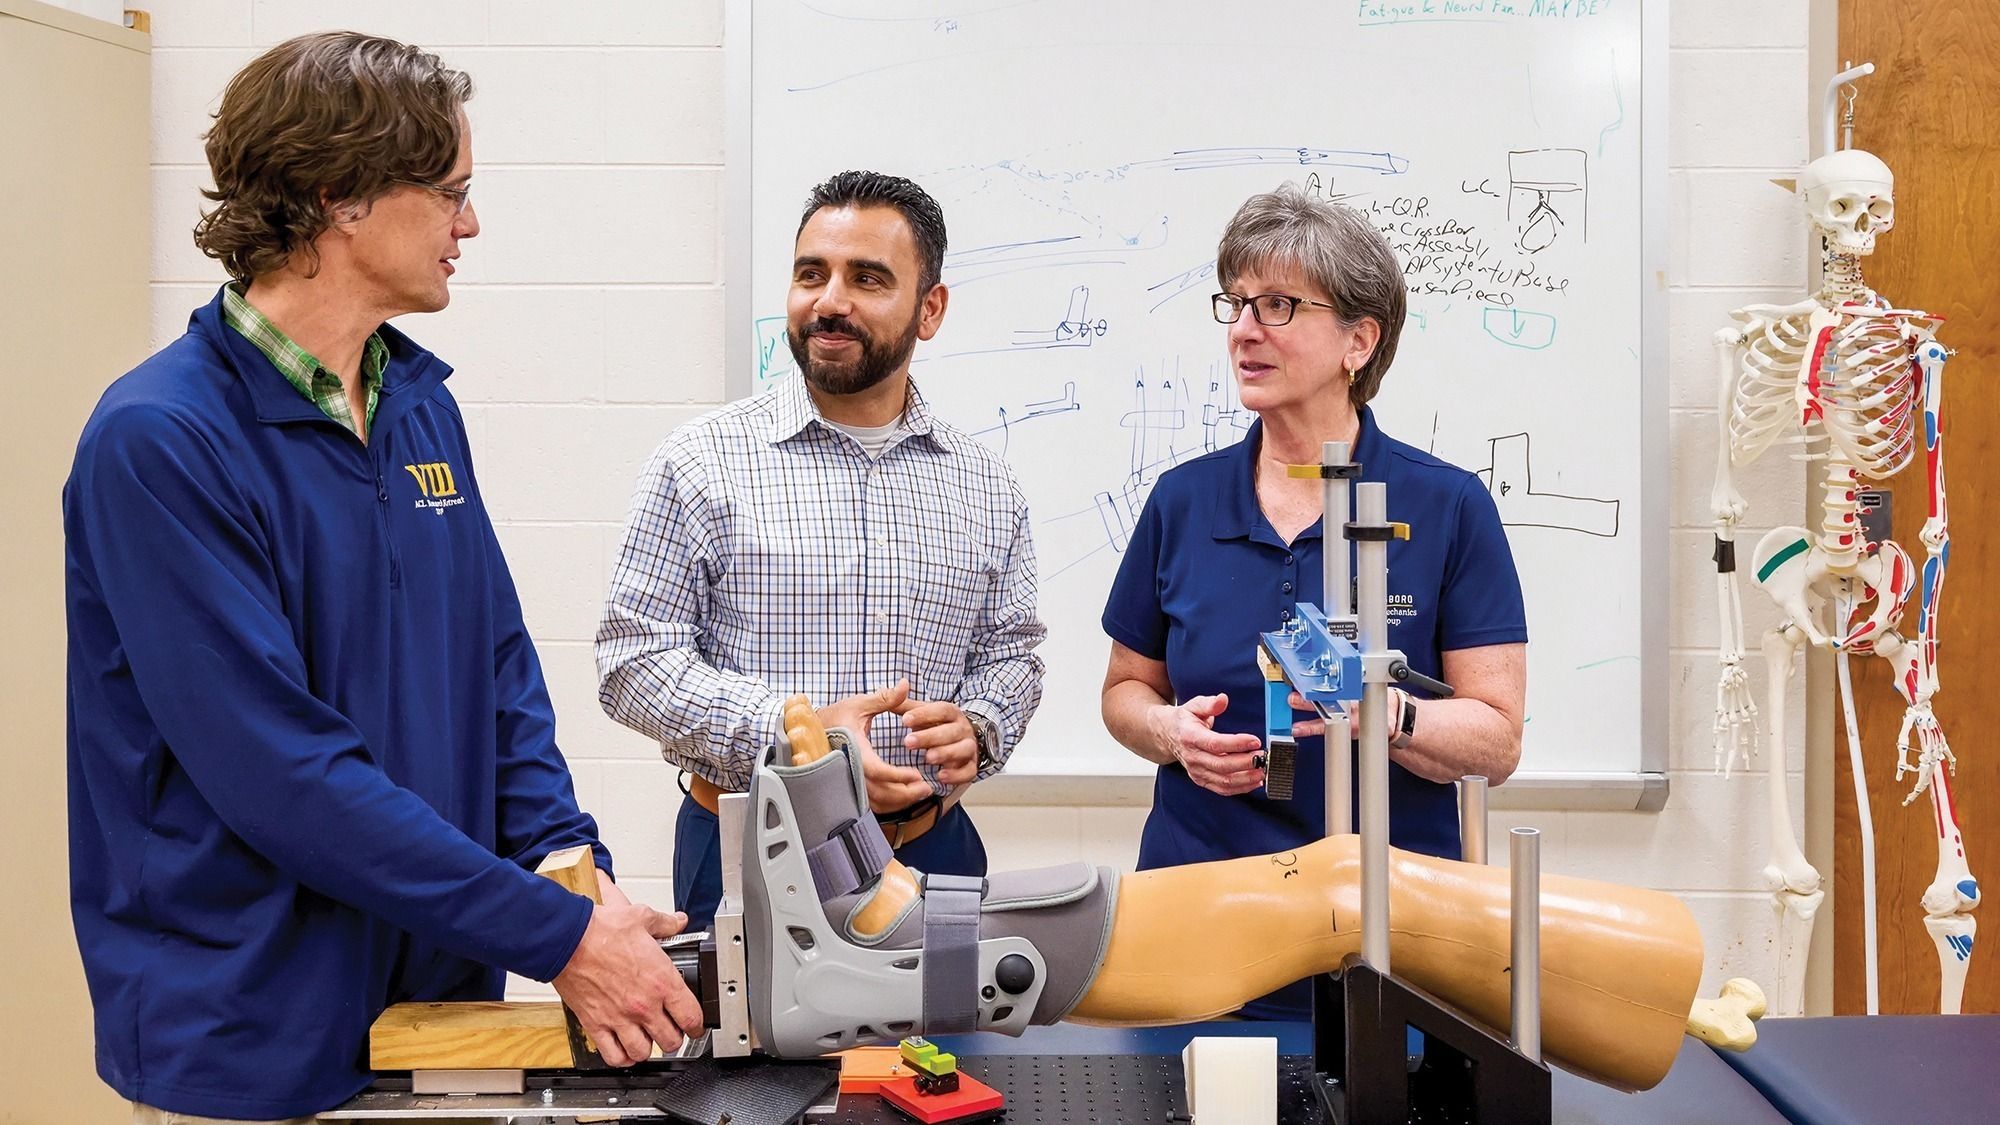 Three researchers discuss a new device using a model of a human leg.